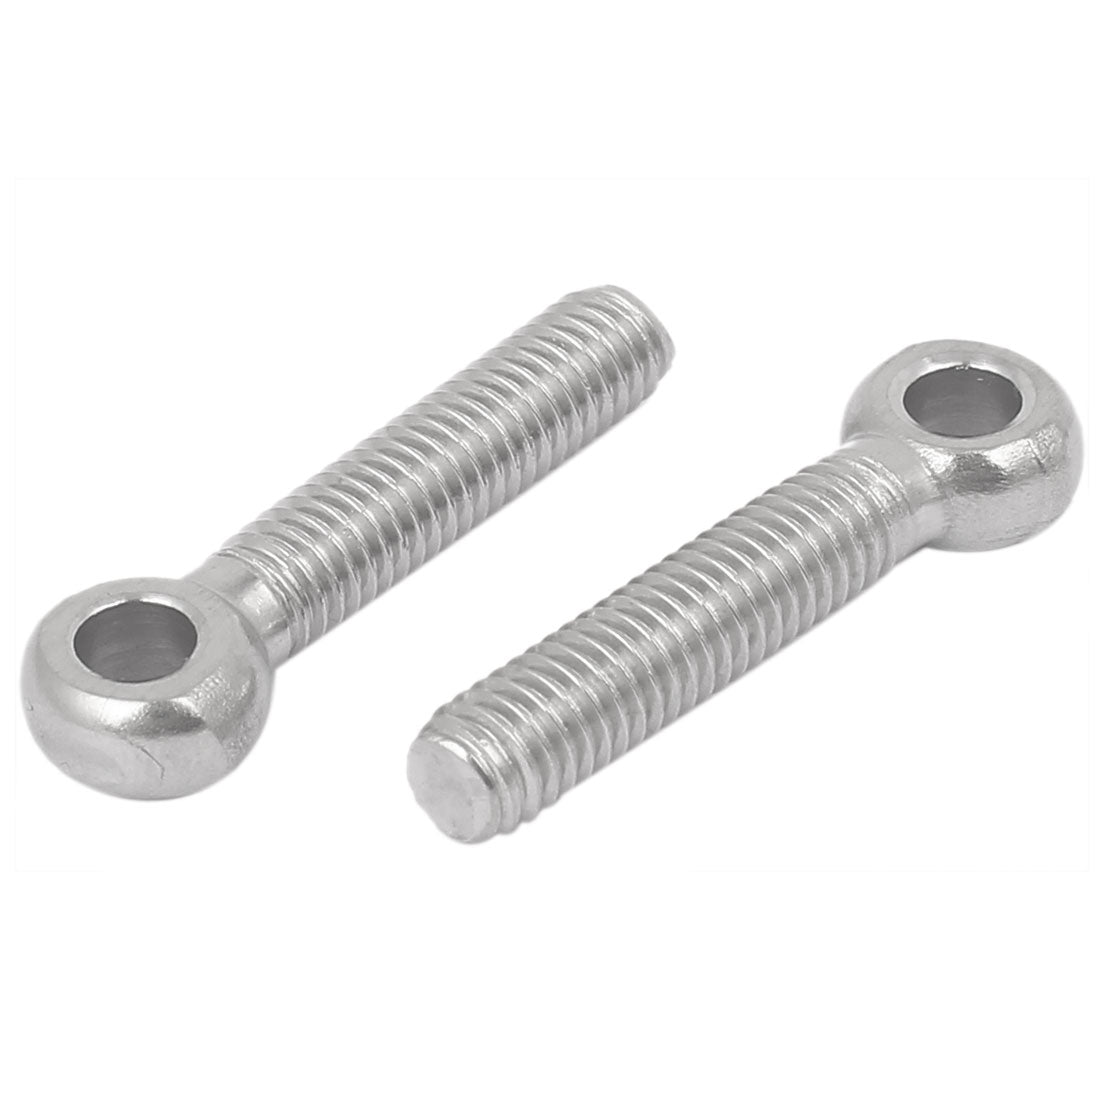 uxcell Uxcell M6 x 30mm 304 Stainless Steel Machine Shoulder Lift Eye Bolt Rigging 20pcs